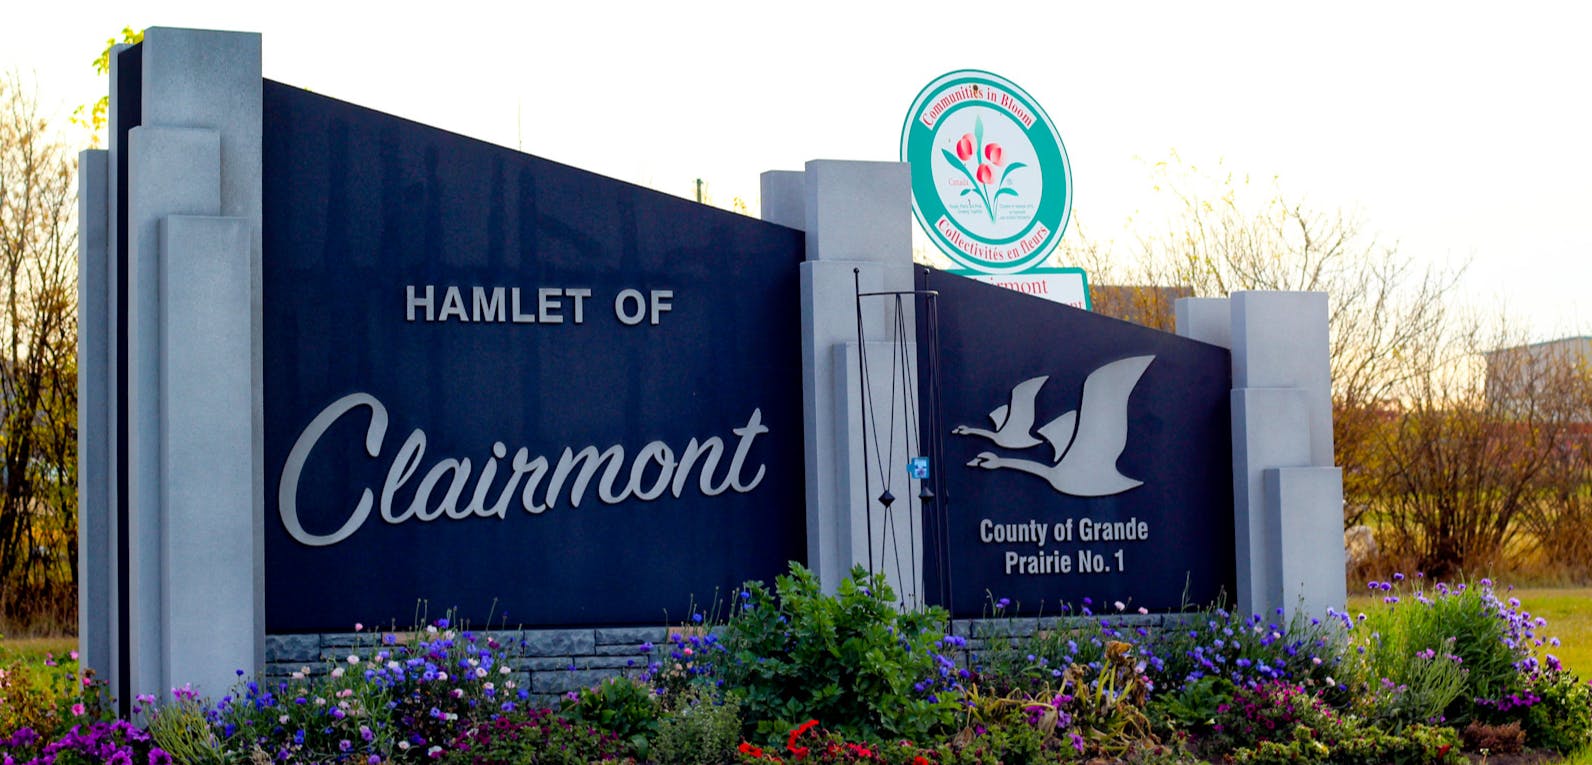 Hamlet of Clairmont sign